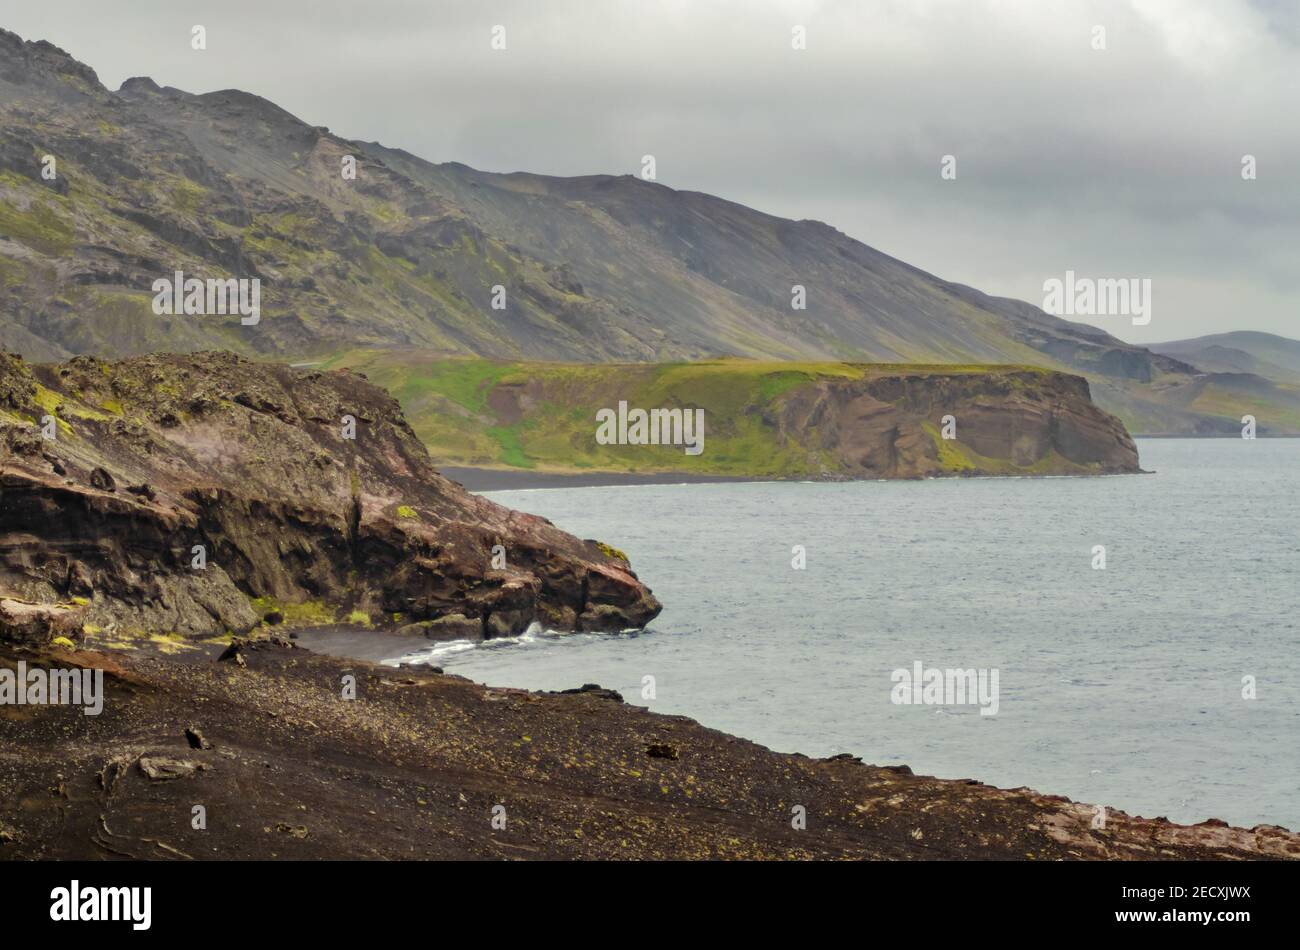 Icelandic nature landscape with a road next to a lake Stock Photo